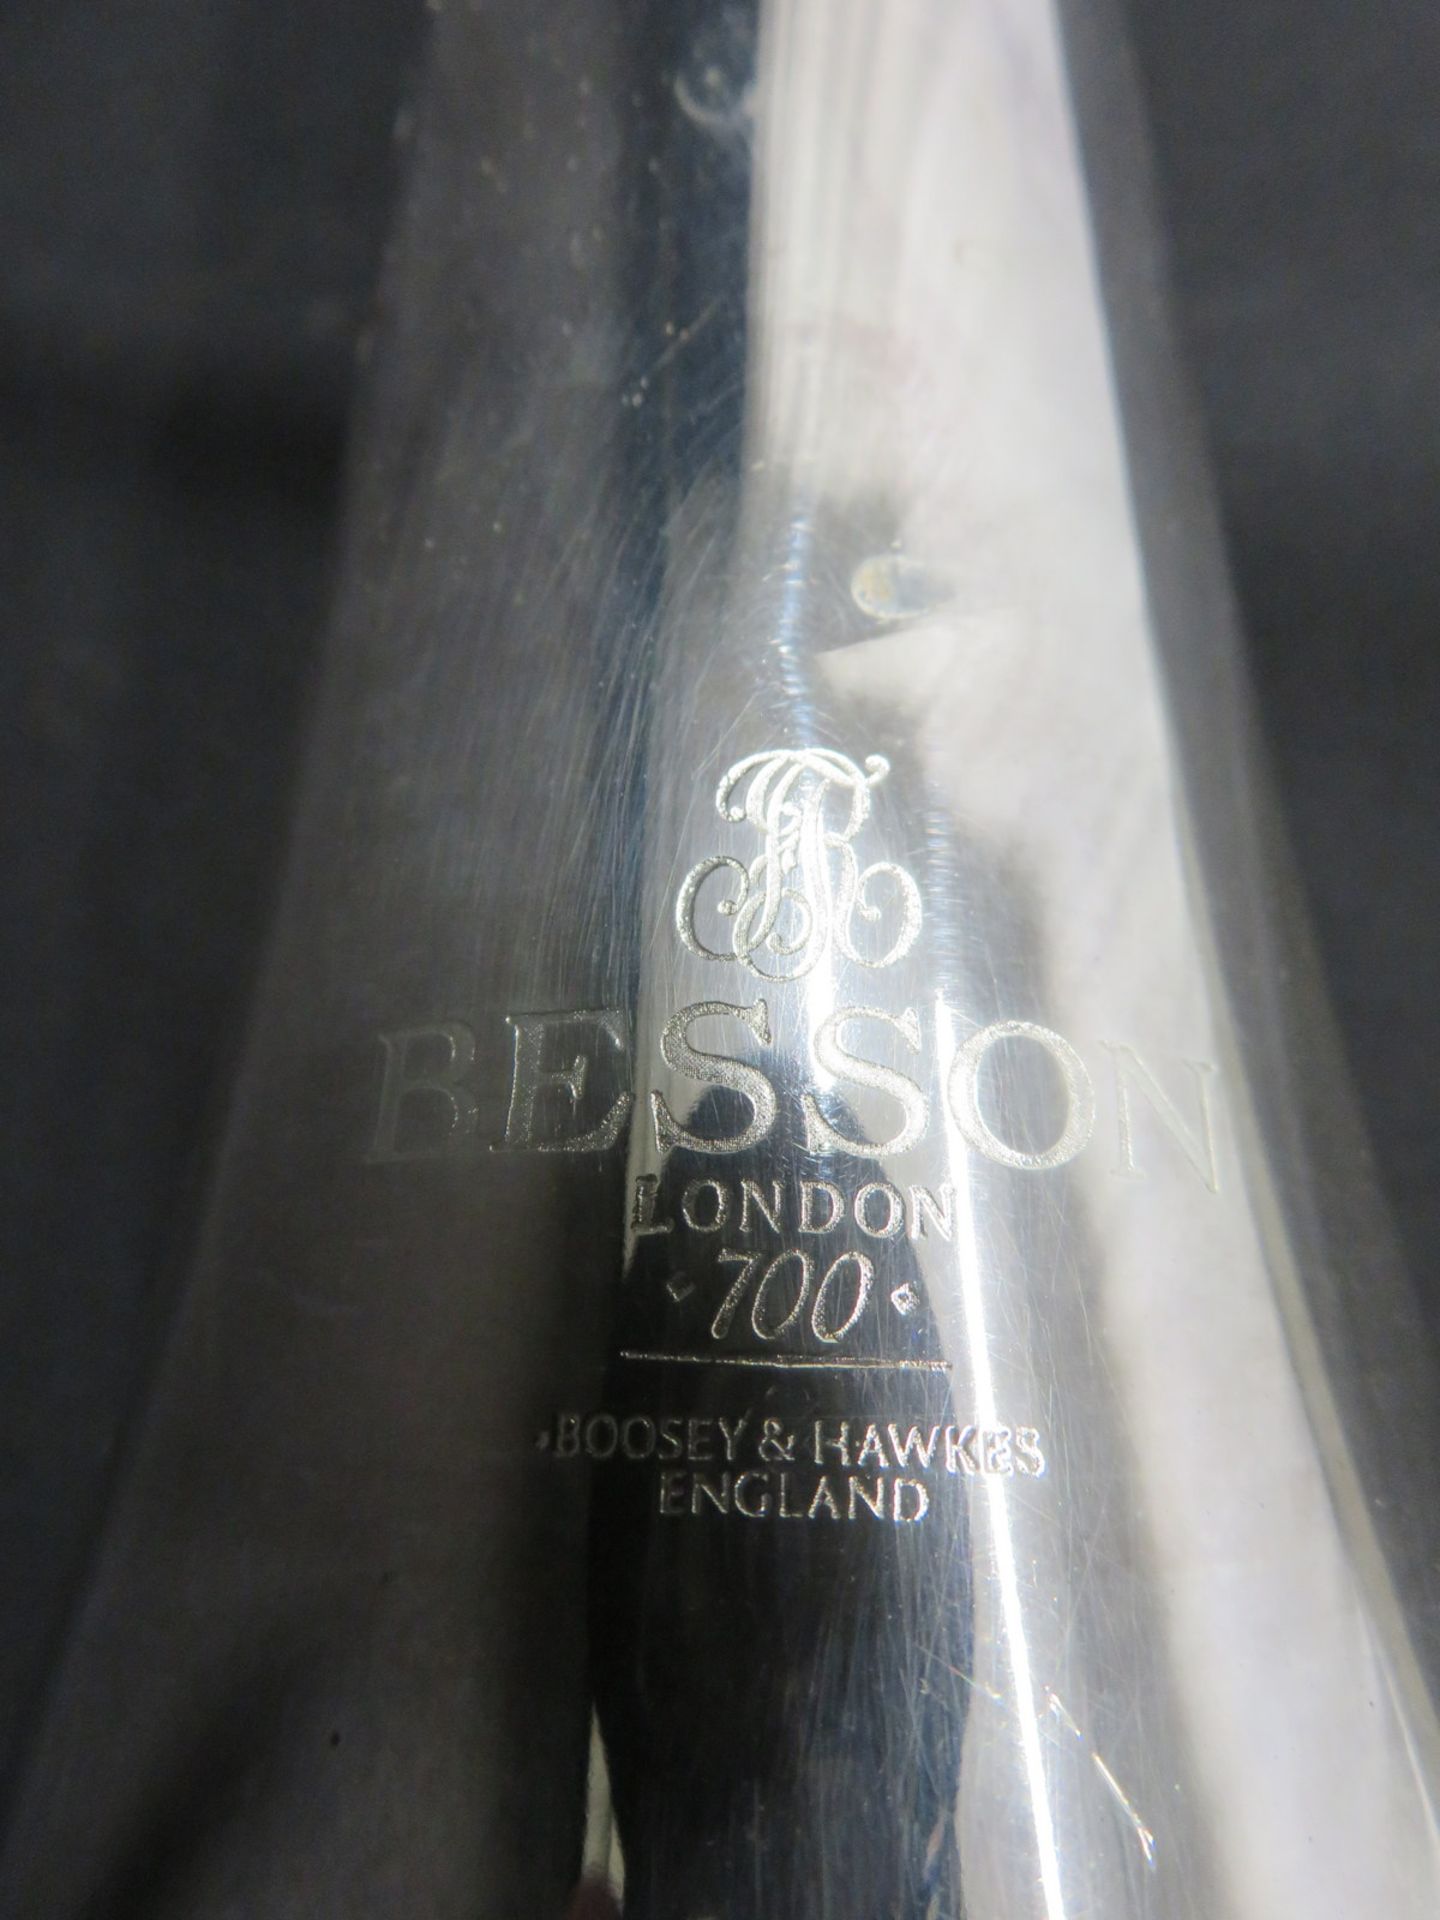 Boosey & Hawkes Besson 700 London tenor fanfare trumpet with case. Serial number: 707-721126. - Image 11 of 18